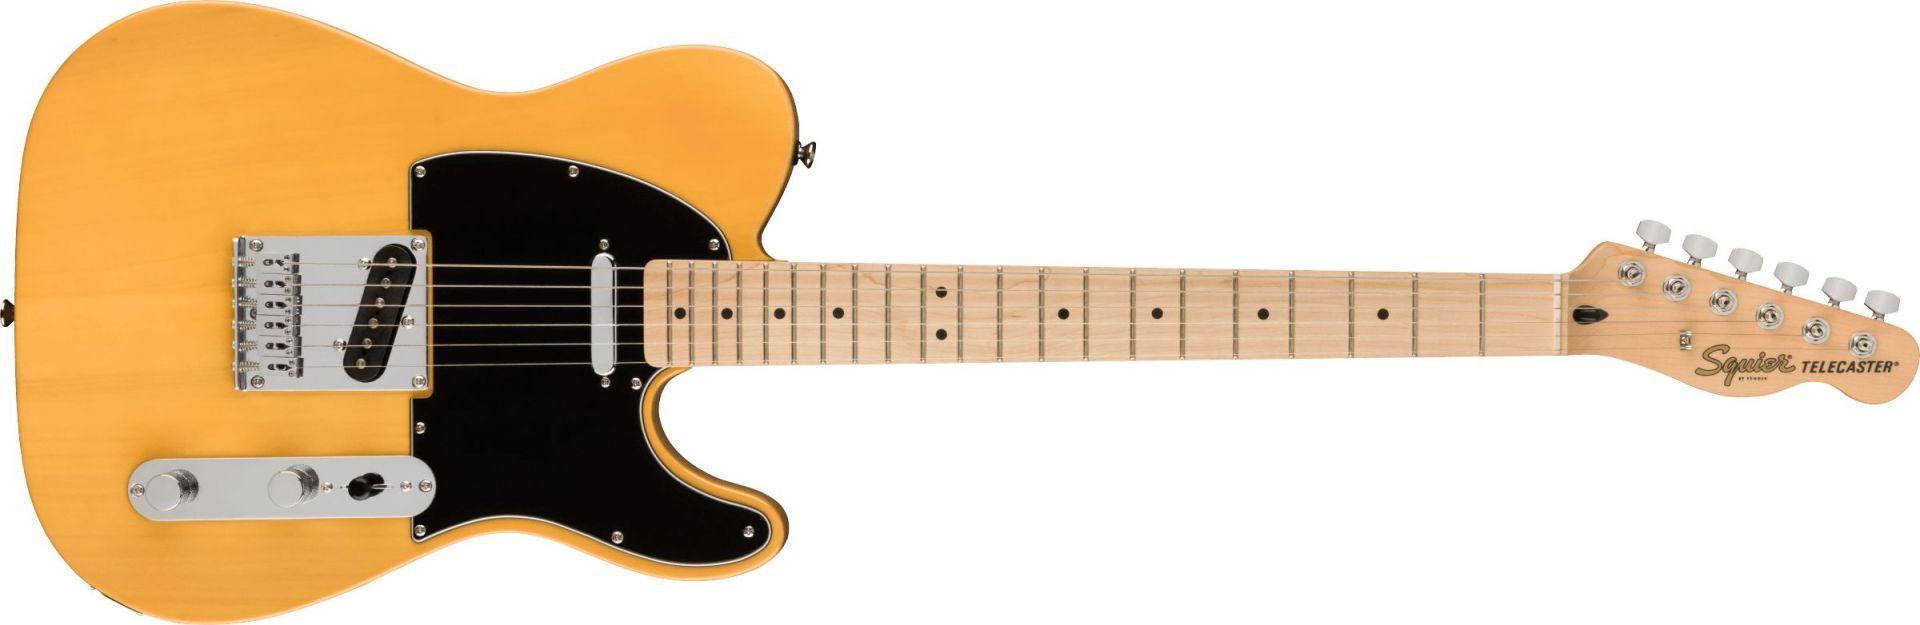 Chitara Electrica Squier Affinity Series Telecaster Butterscotch Blonde